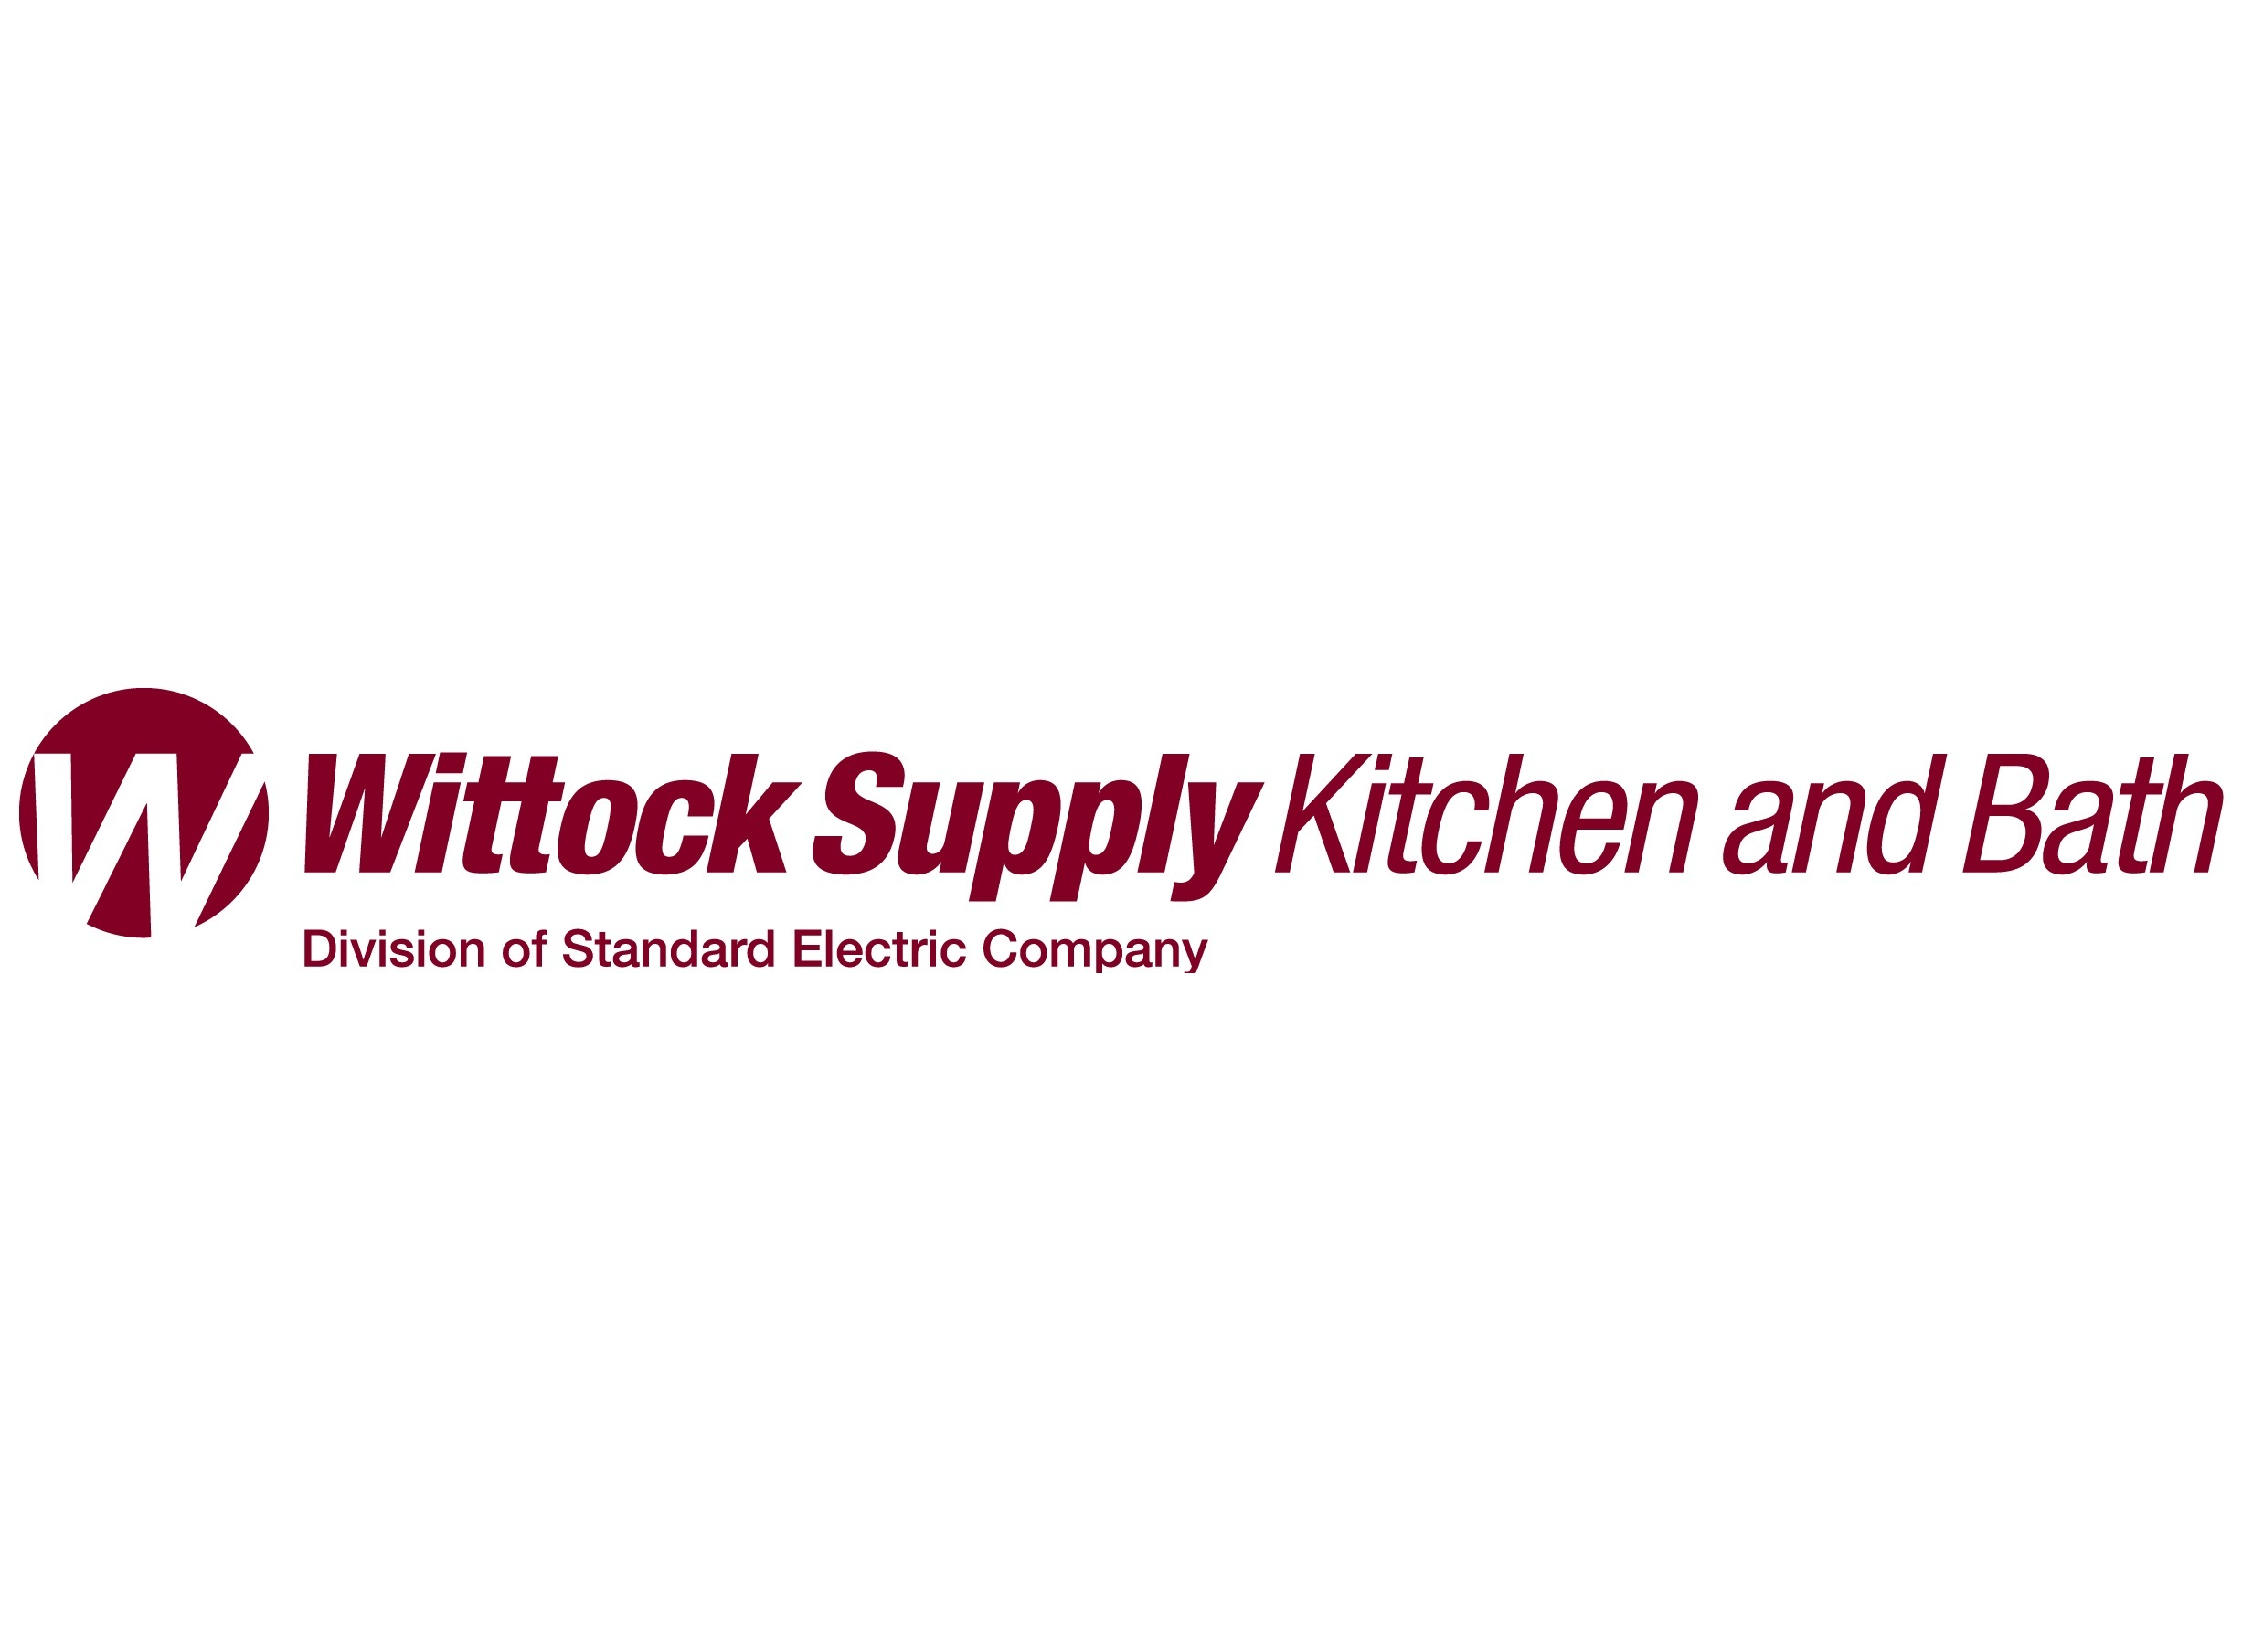 wittock kitchen and bath shelby twp mi